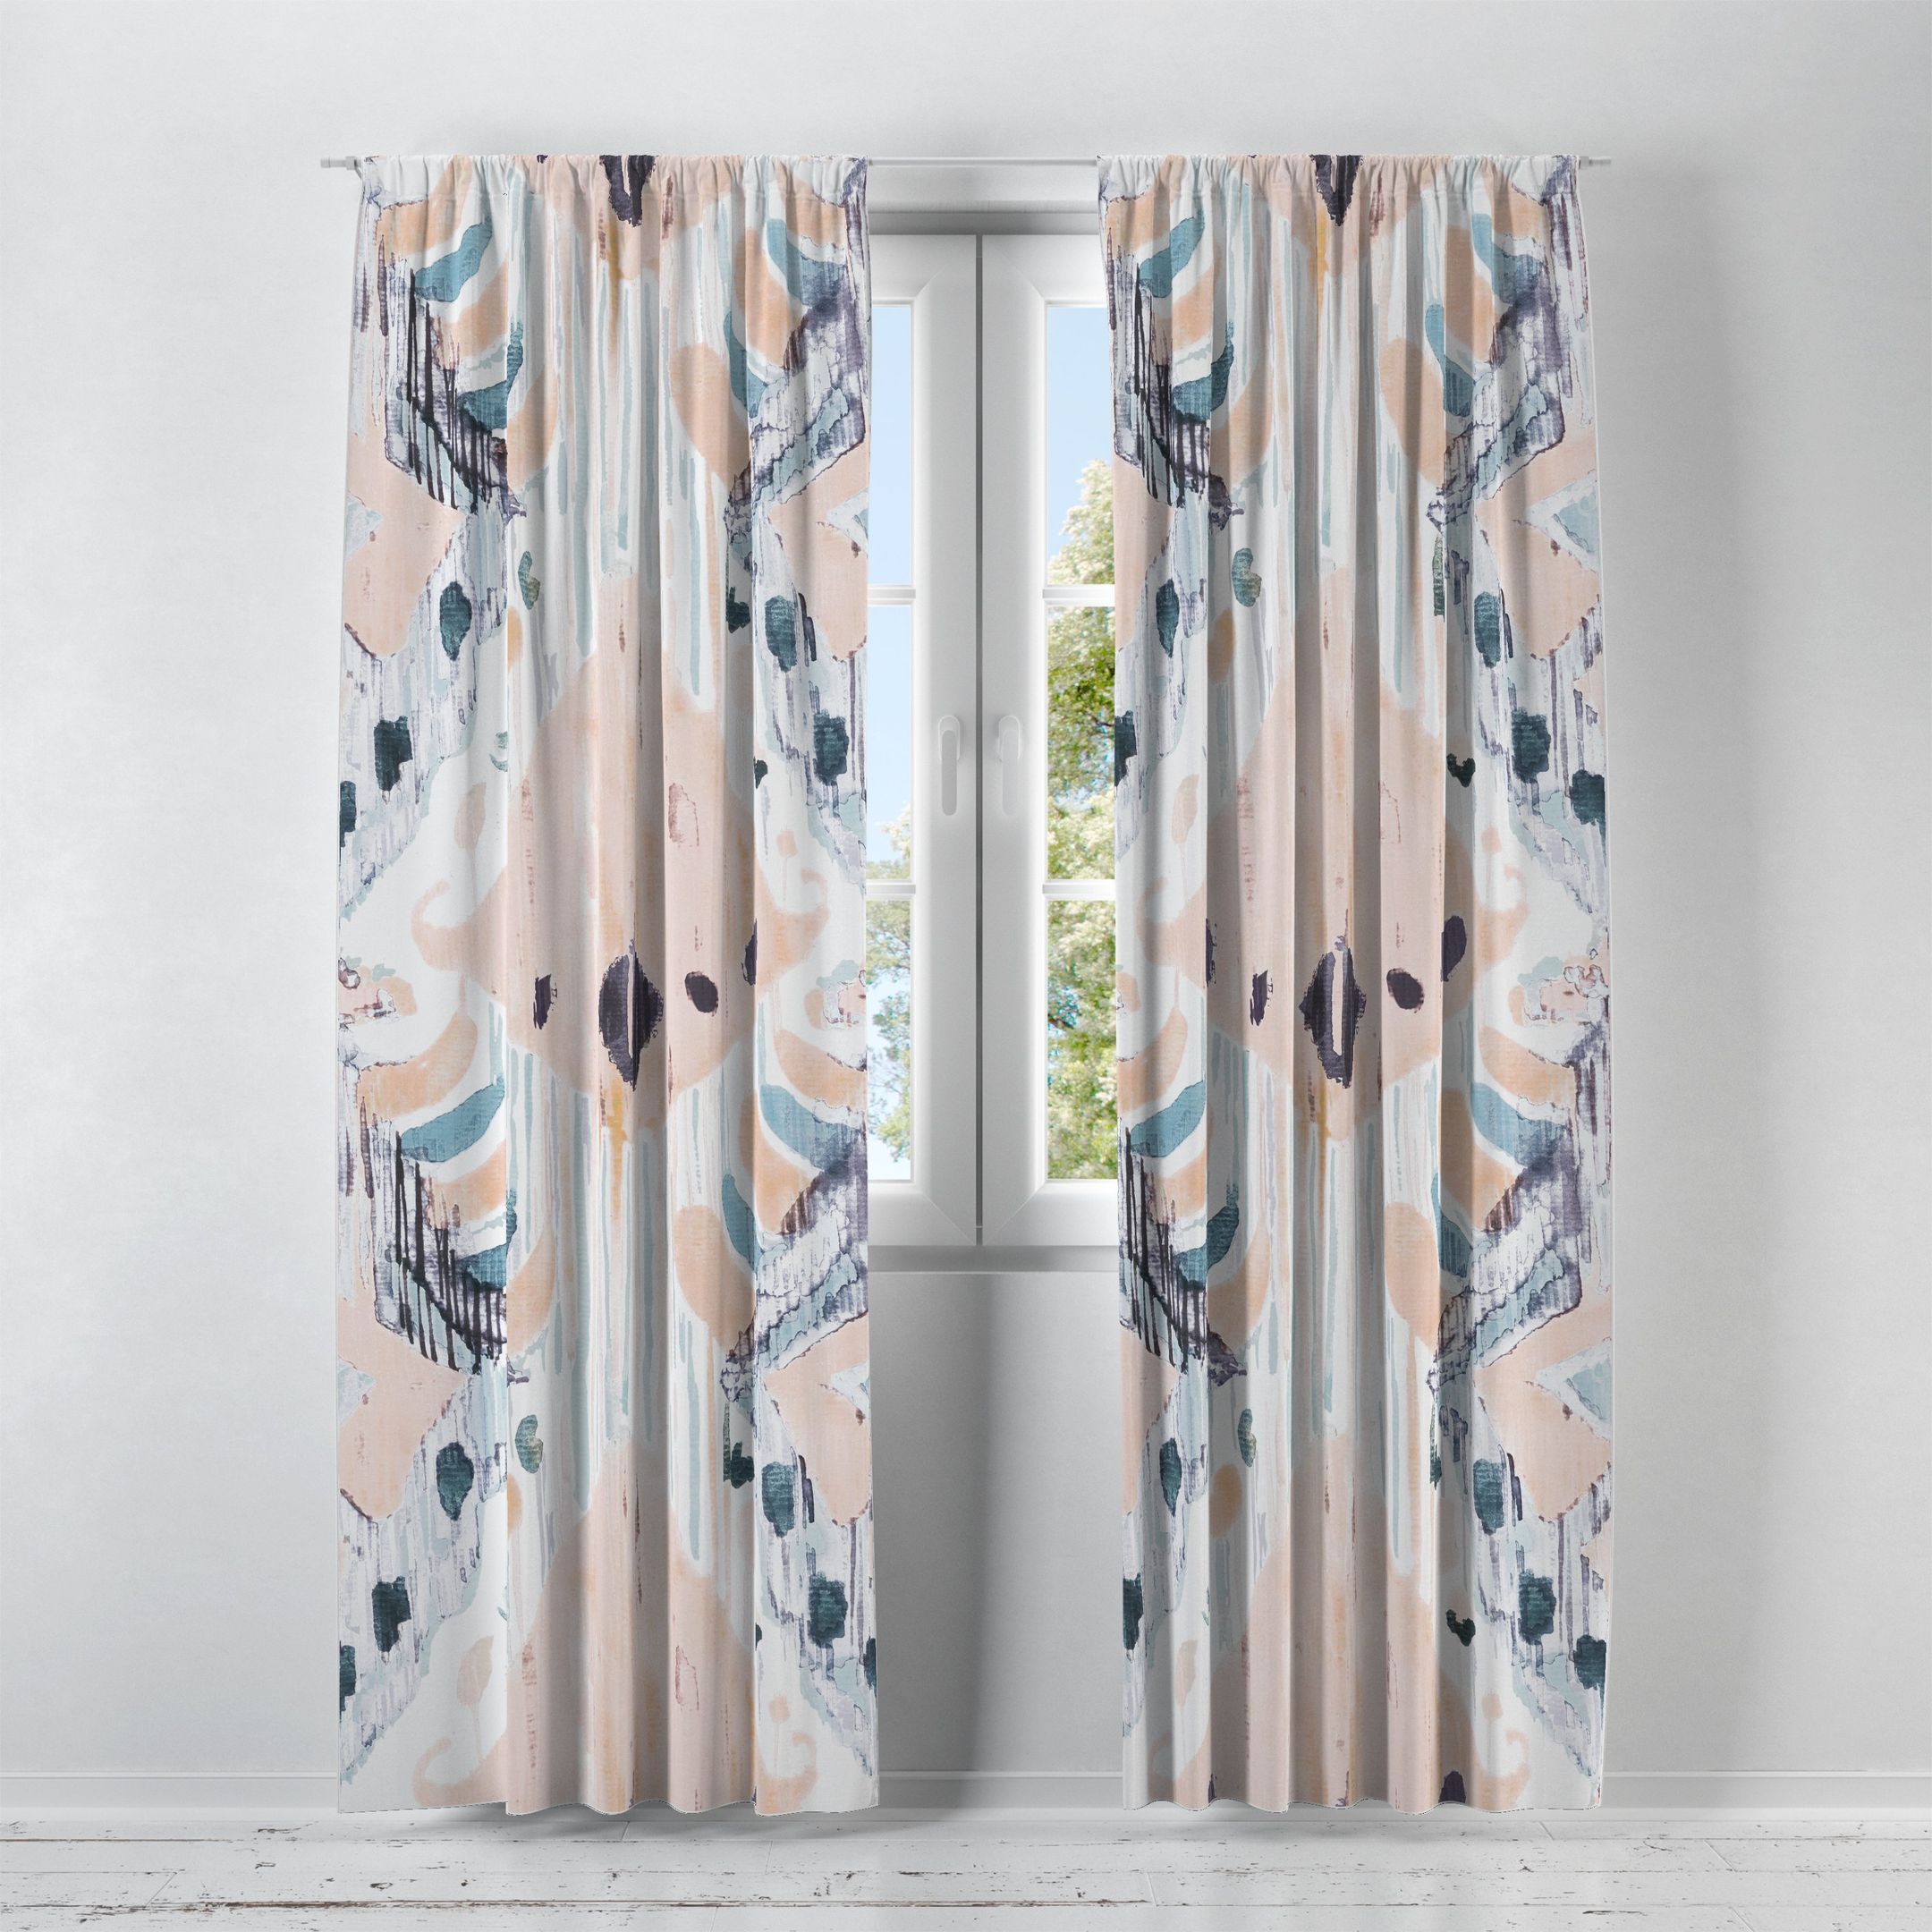 Vibrant Tranquil Ikat Window Curtains Home Decor